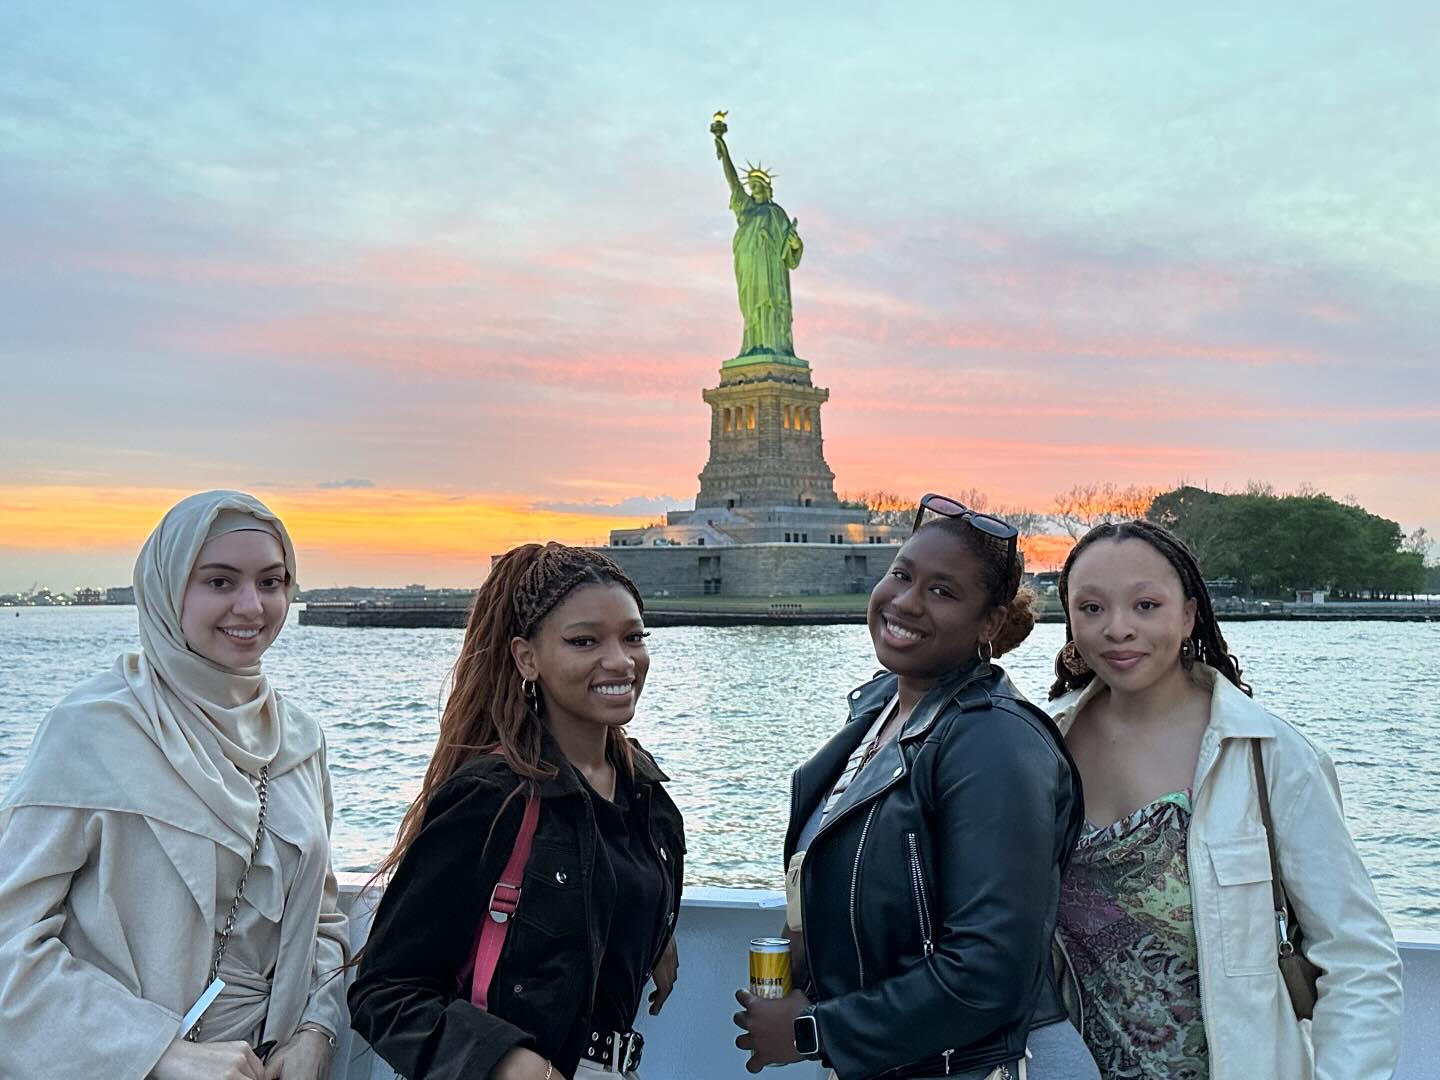 Four individuals posing in front of the Statue of Liberty at sunset.